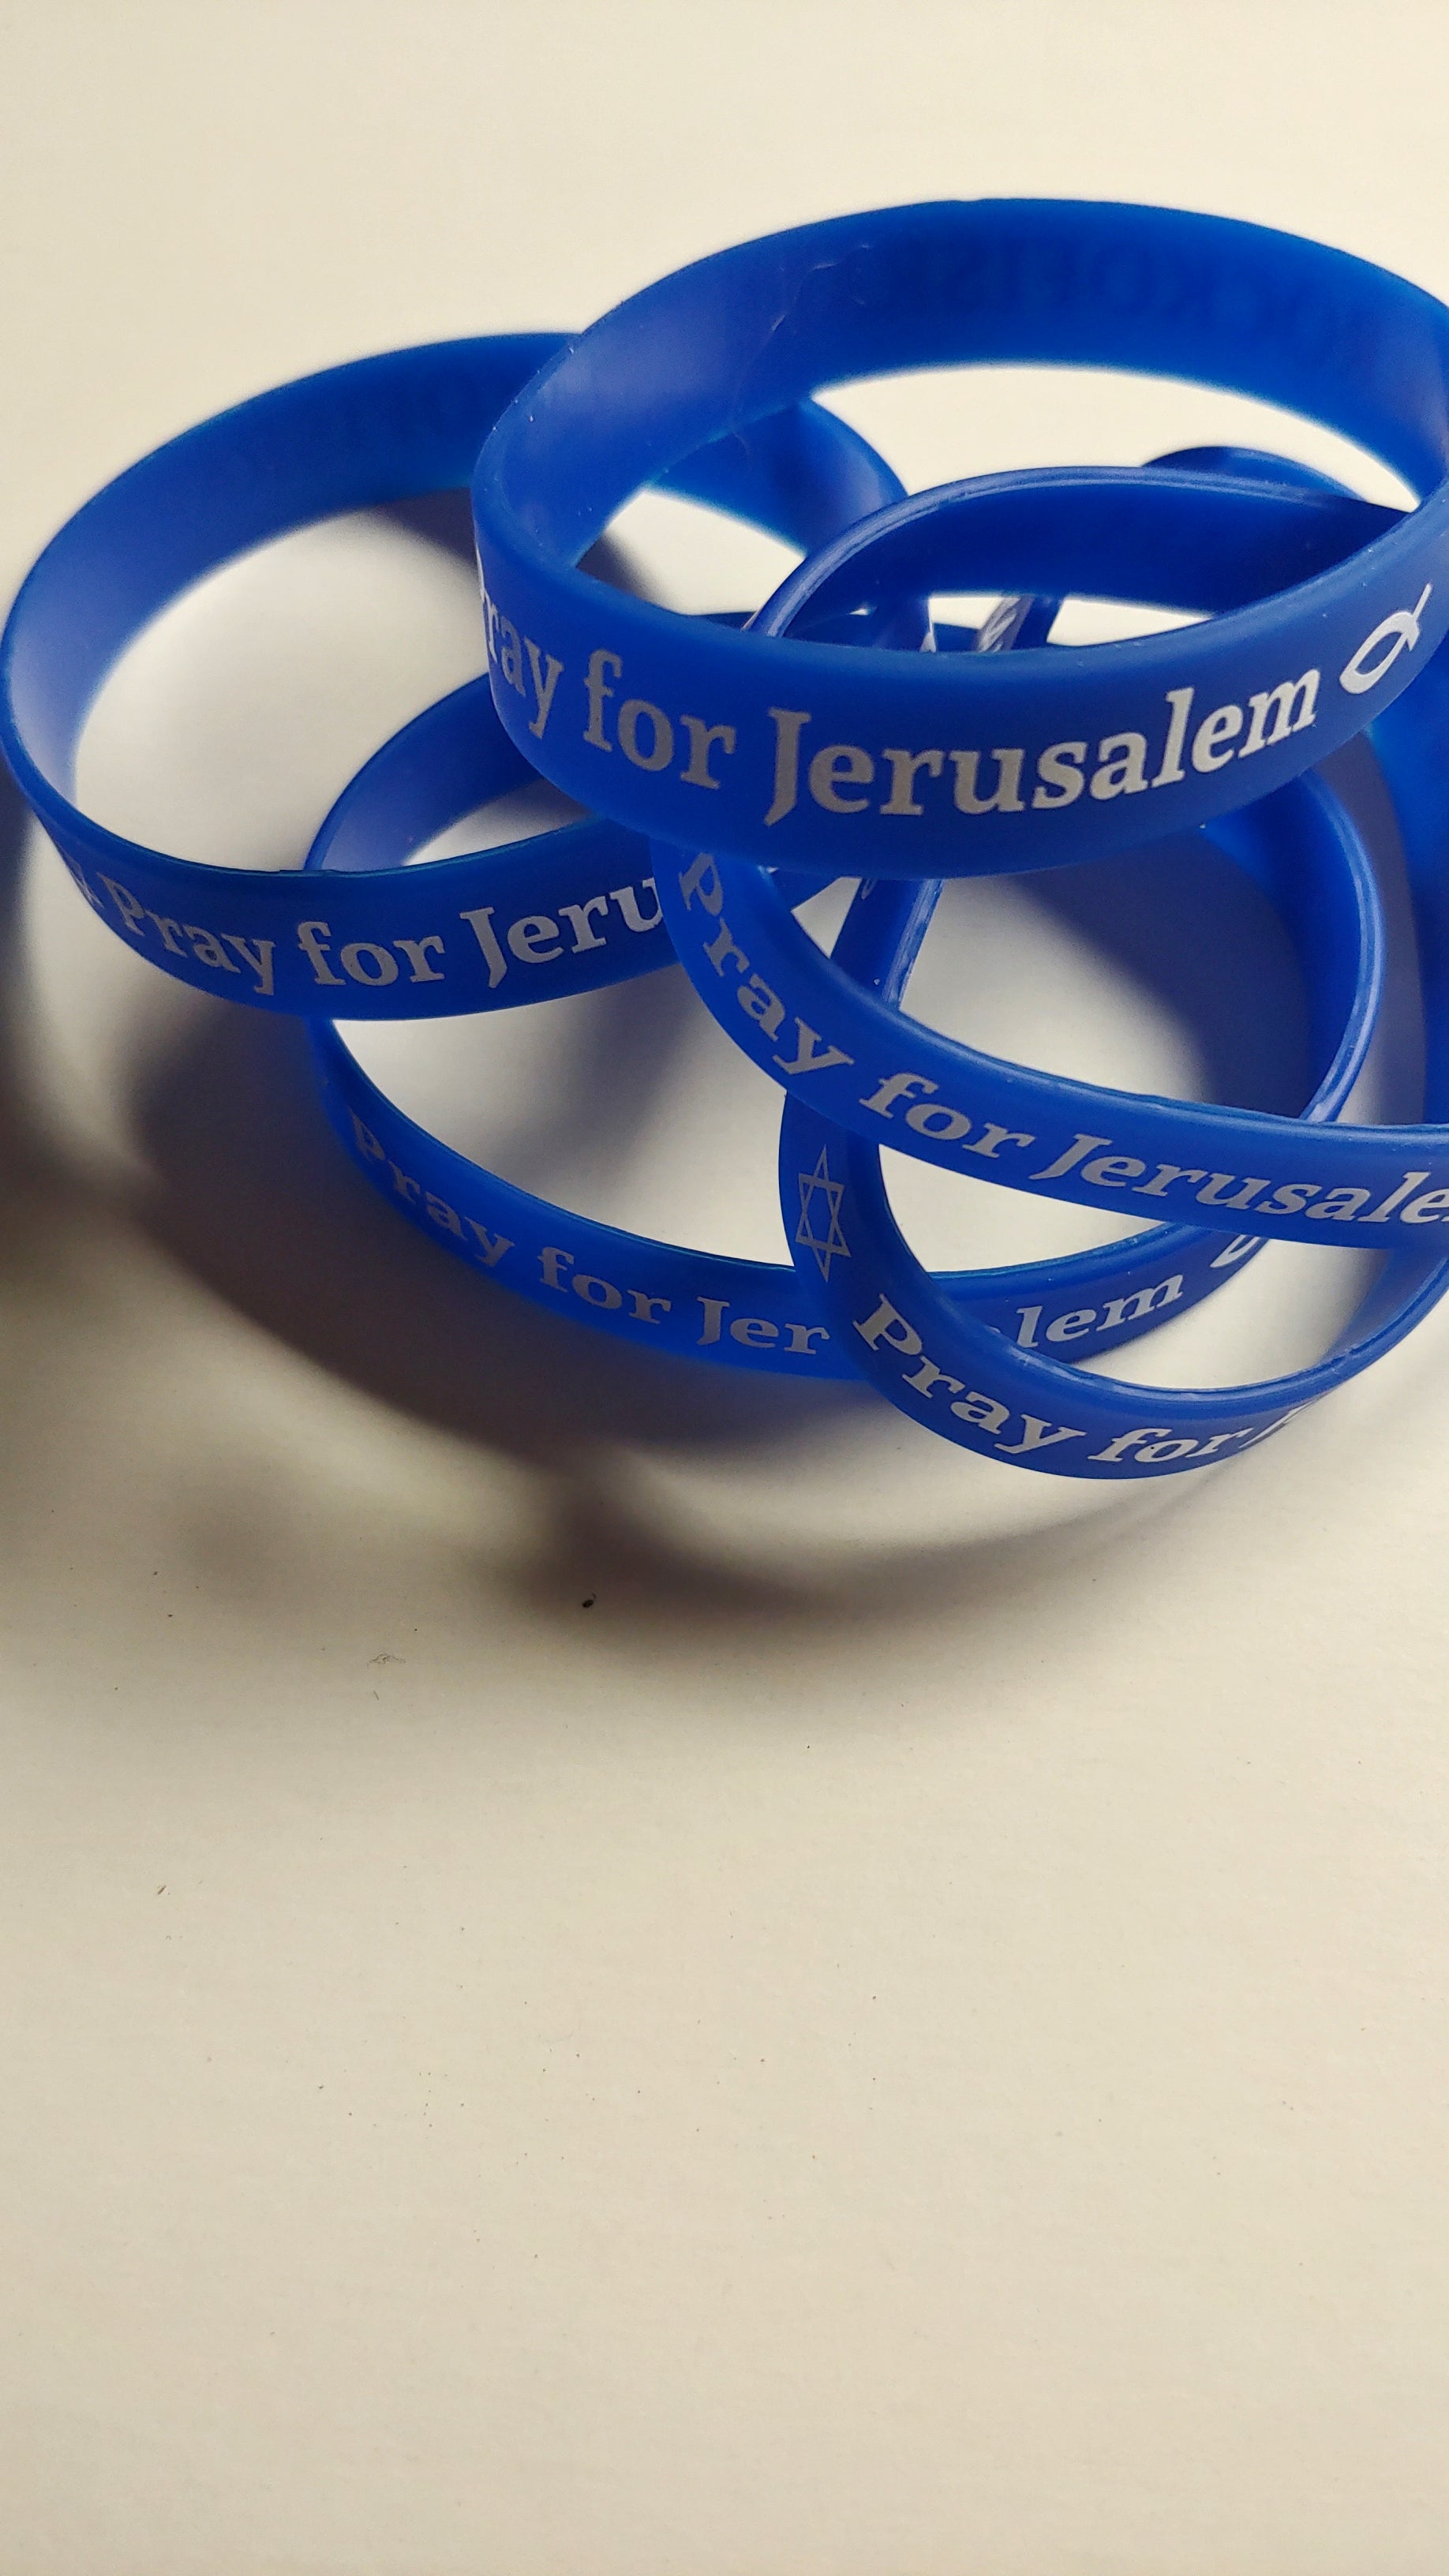 Pray for Jerusalem wristband – Israel of / Rock Israel Pray for rubber Store